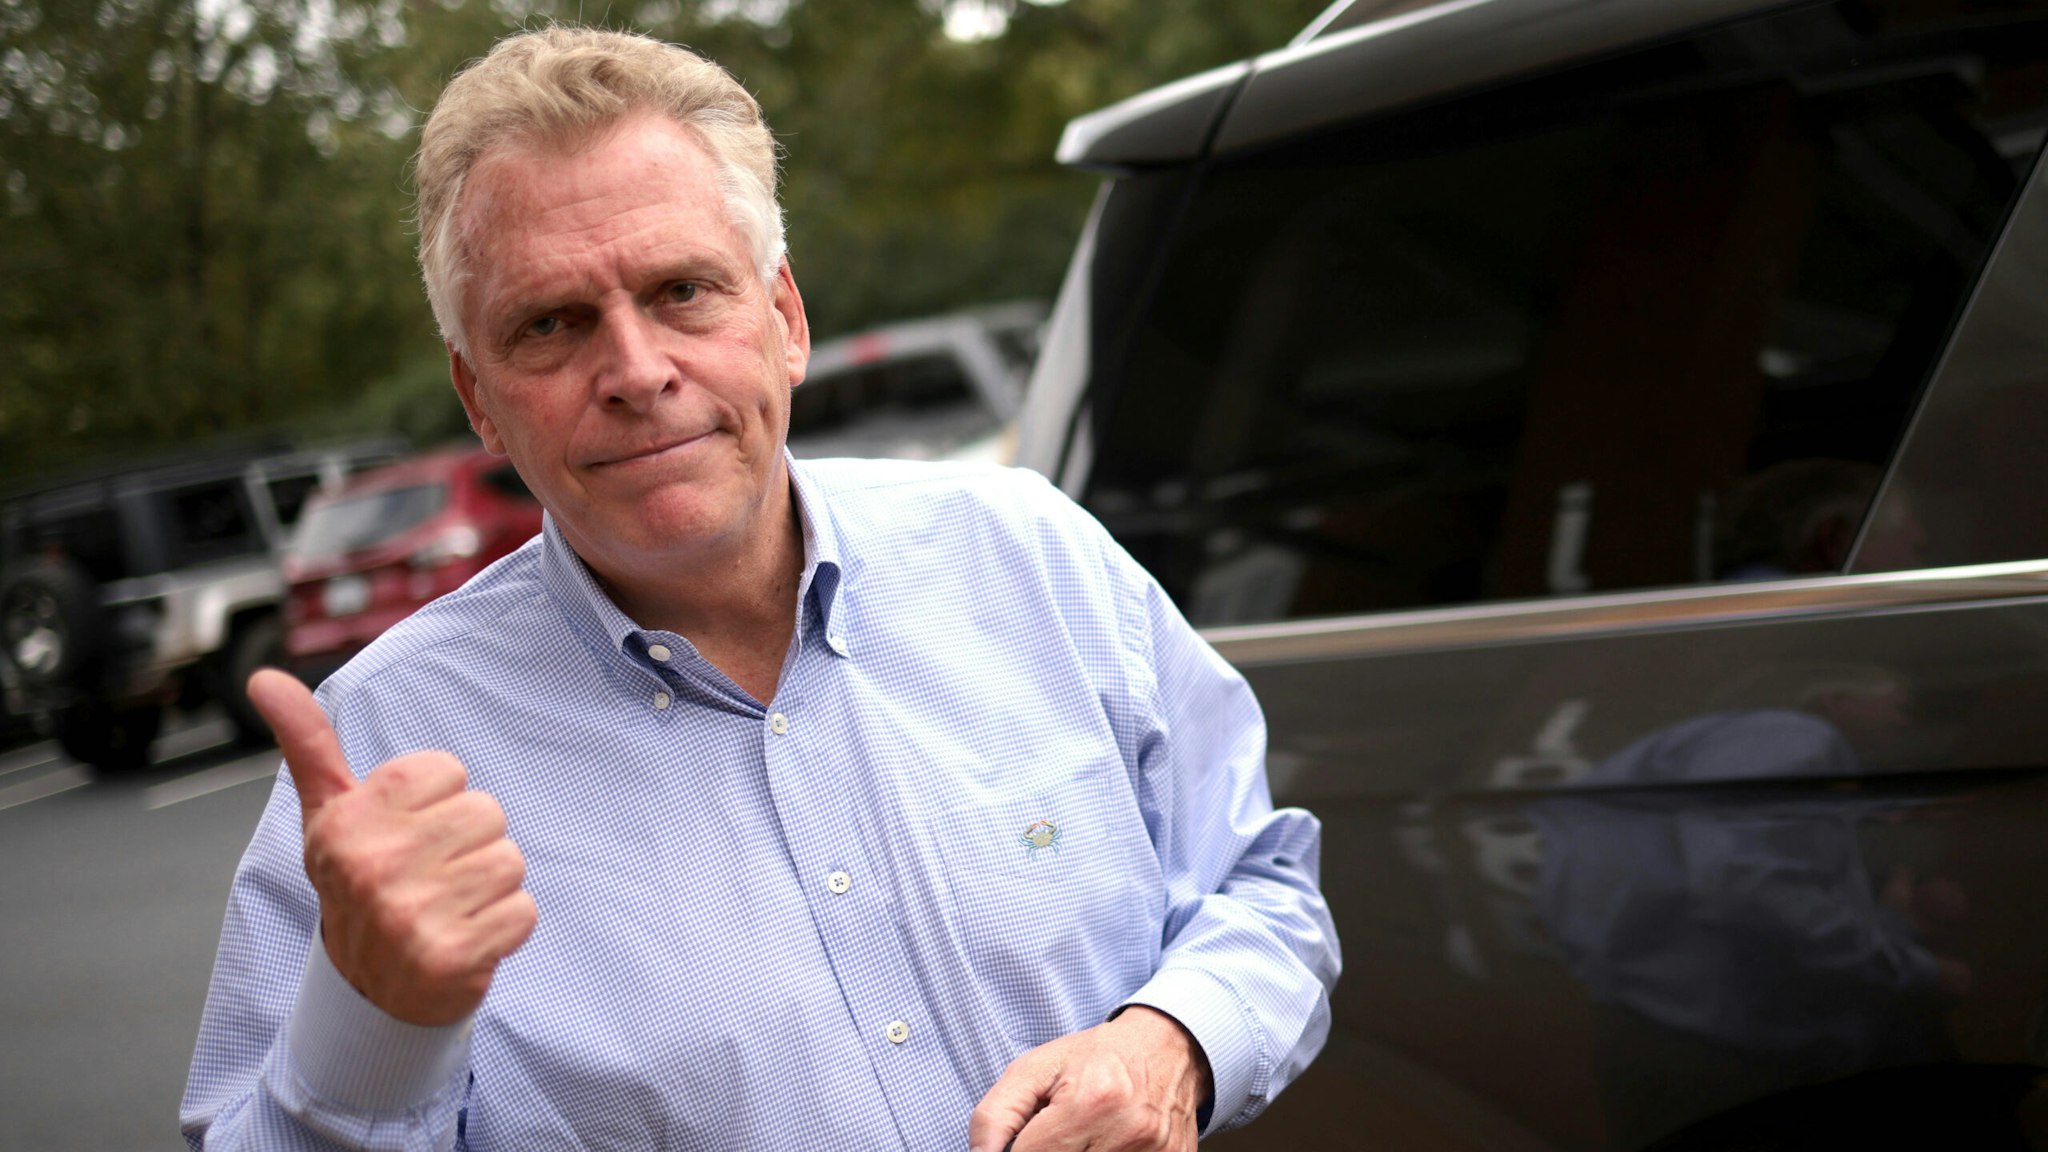 CHARLOTTESVILLE, VIRGINIA - OCTOBER 11: Former Virginia Gov. Terry McAuliffe (D-VA) departs a campaign event at the JABA Shining Stars Preschool Program October 11, 2021 in Charlottesville, Virginia. McAuliffe toured the preschool to discuss his plans to invest in education and affordable child care. The Virginia gubernatorial election is November 2.